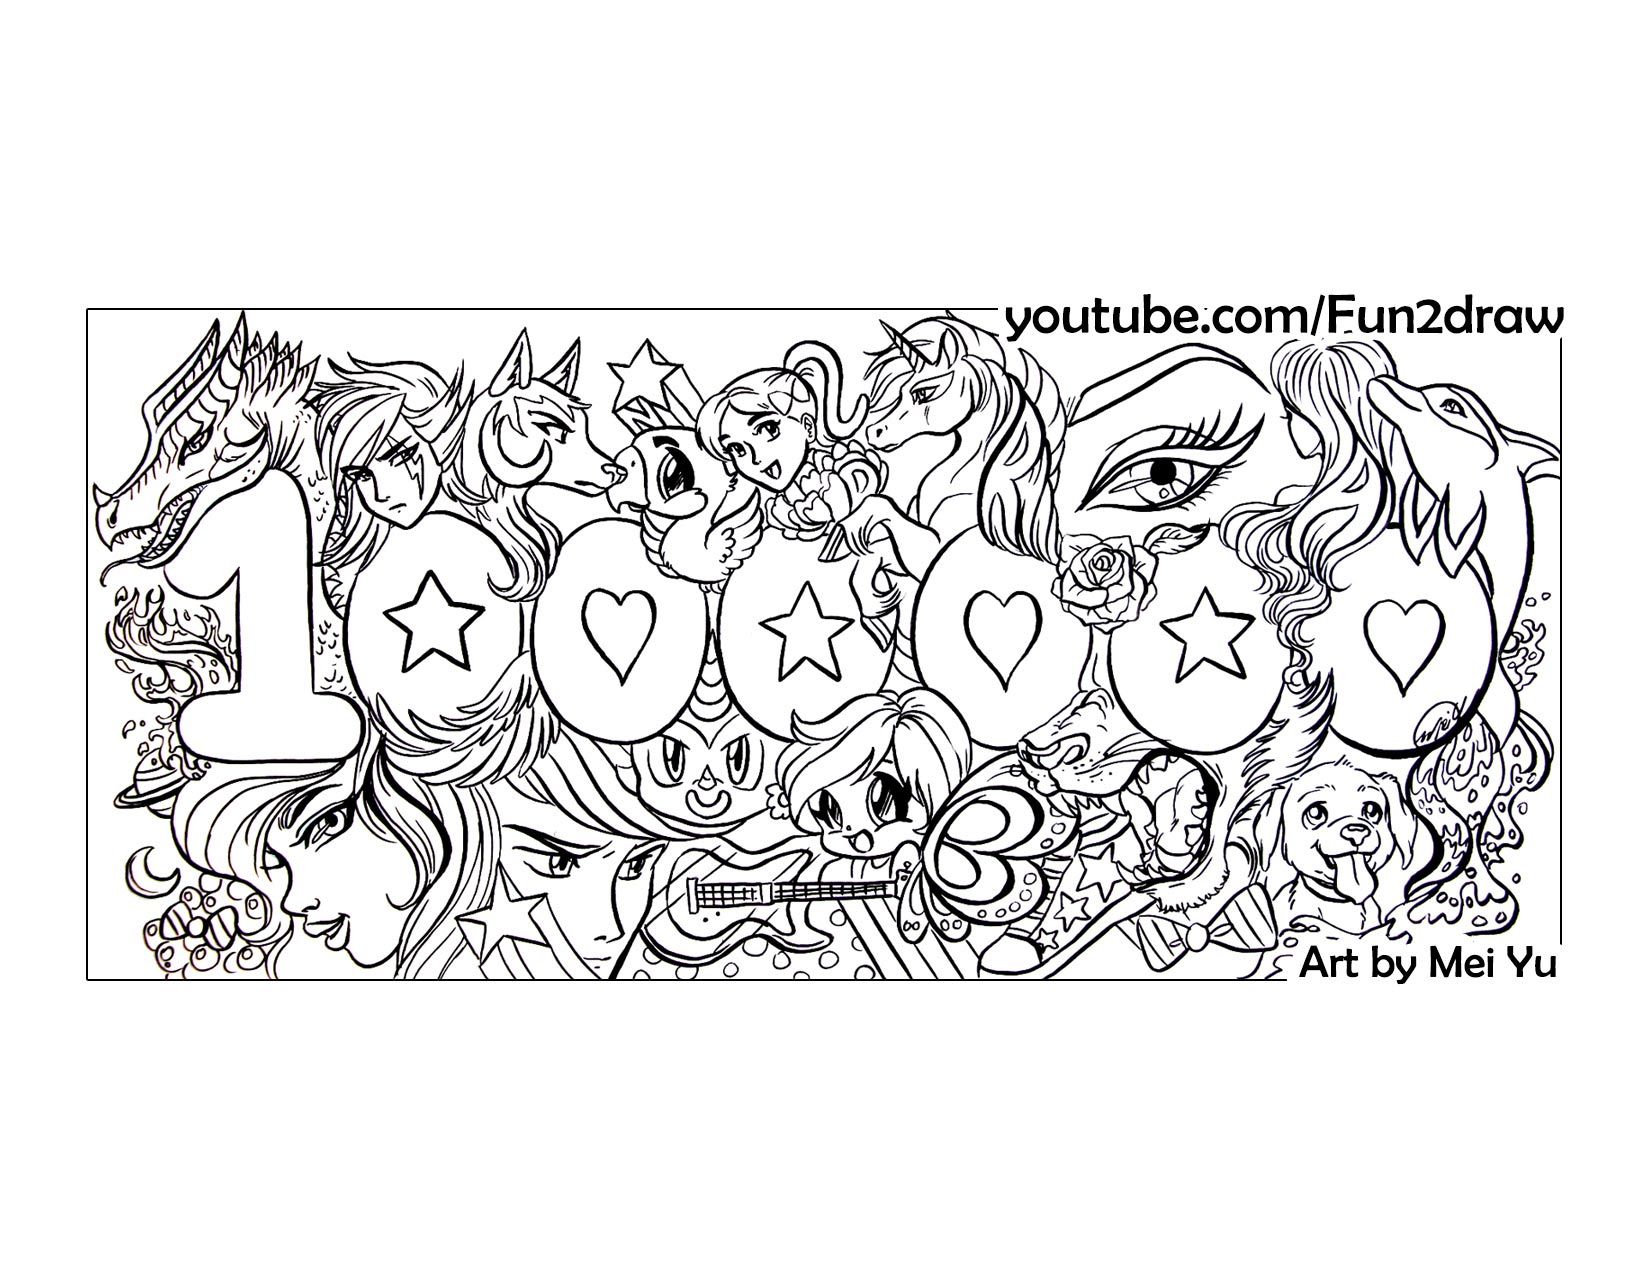 A fun art activity to print and color, as a special gift for Fun2draw fans in celebration of 1 million YouTube 
					subscribers.